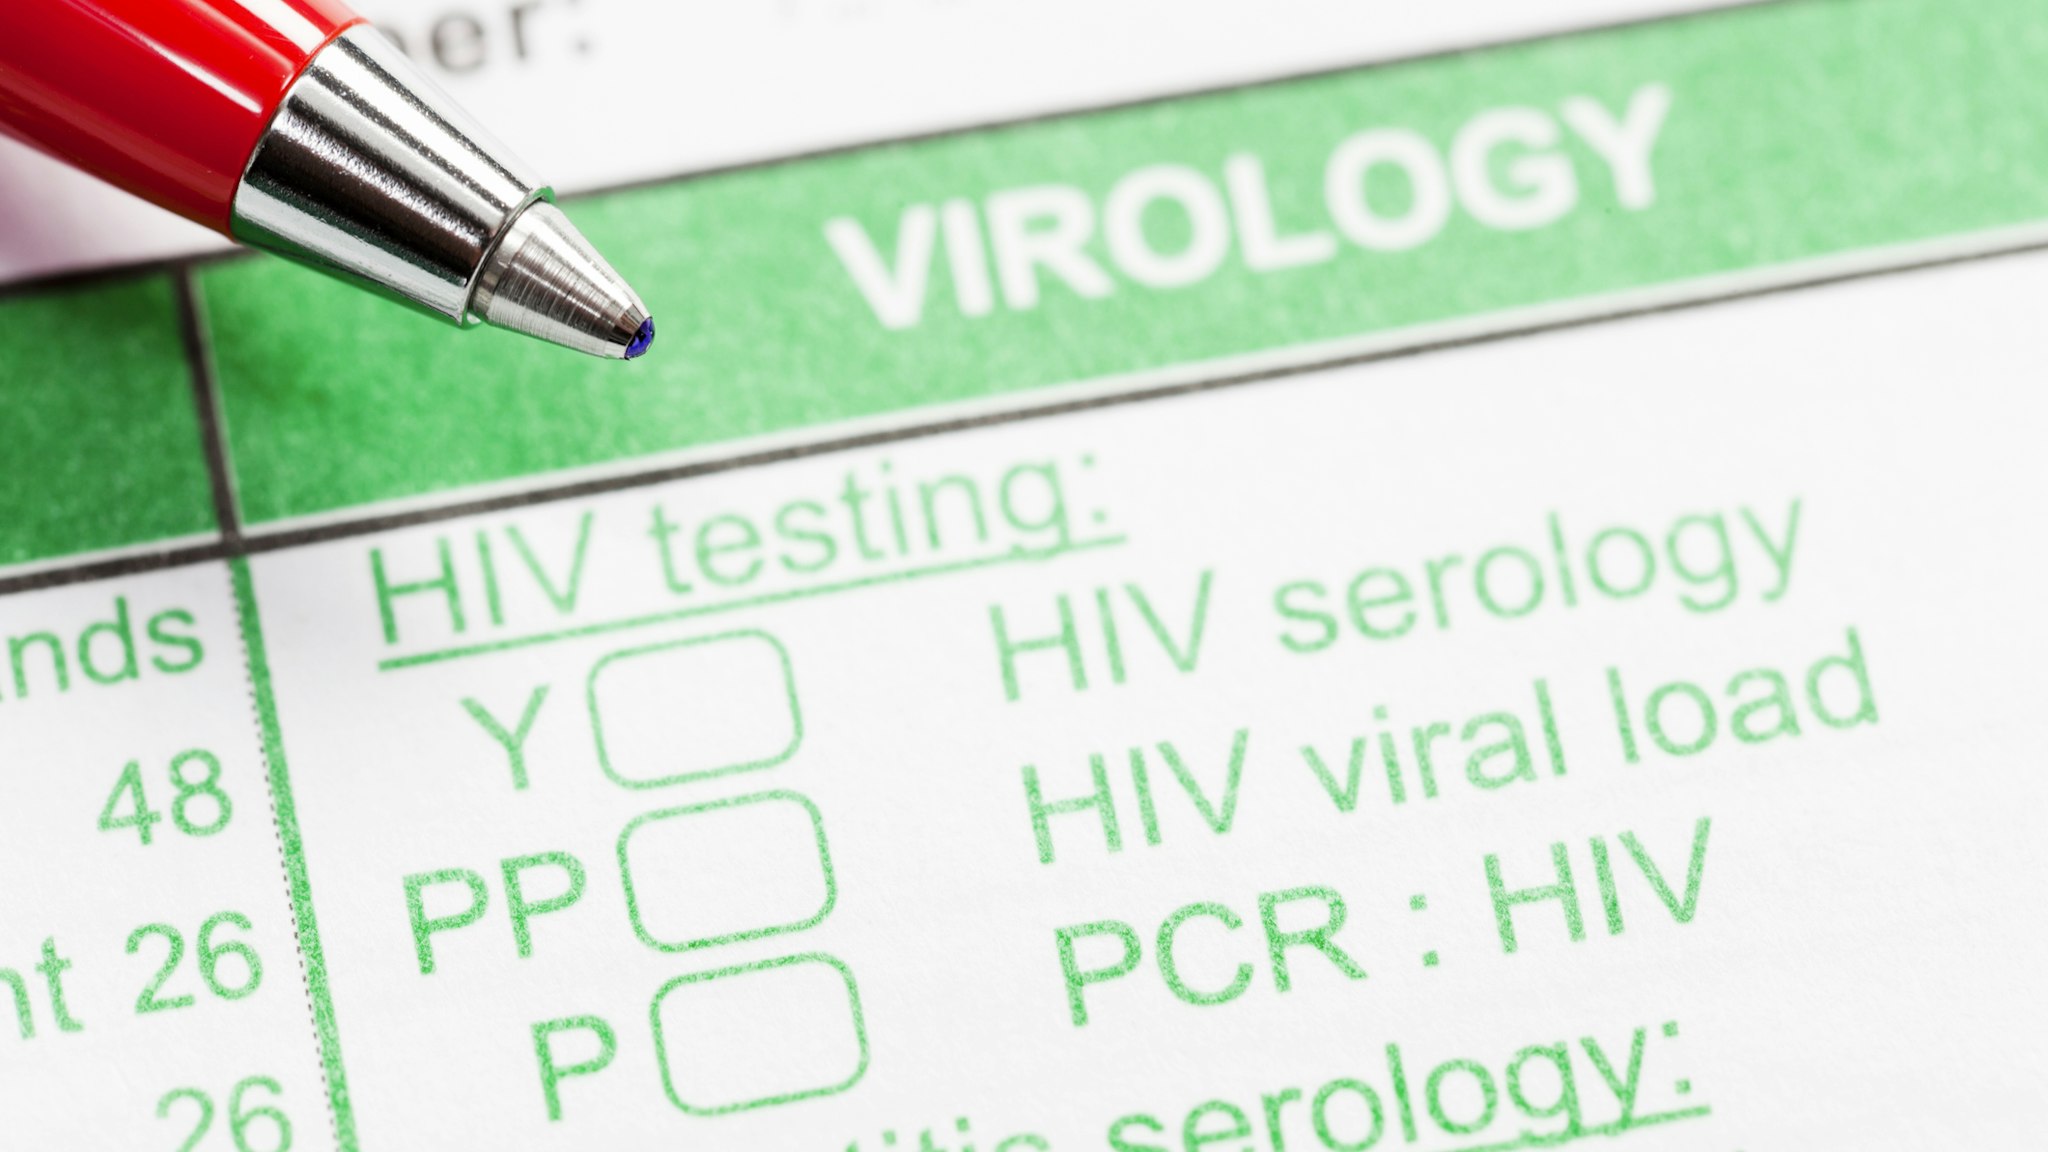 Red pen on virology form ordering HIV tests - stock photo